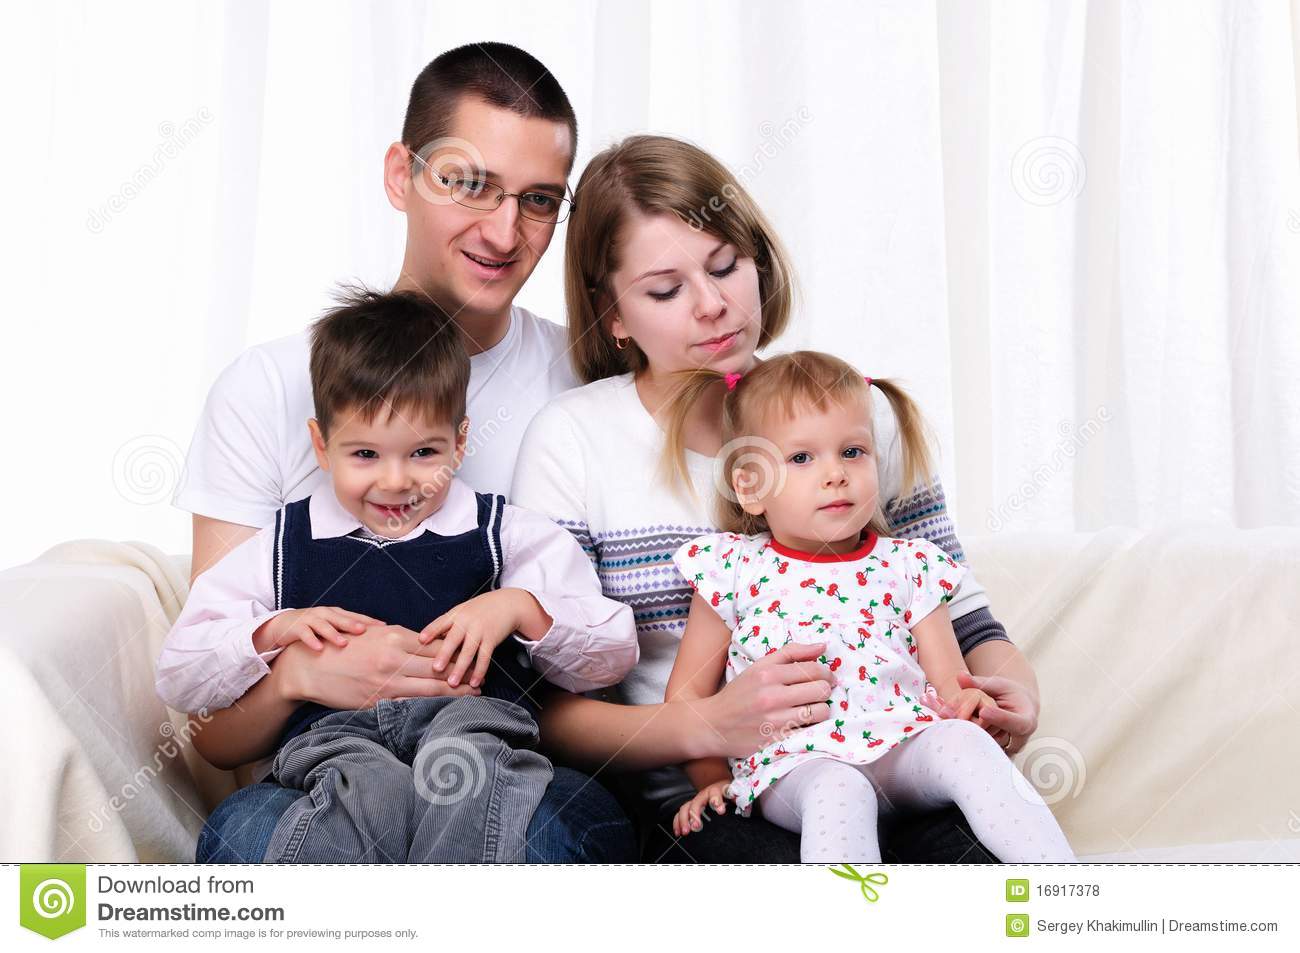 Happy Family Spending Time Together Royalty Free Stock Photos   Image